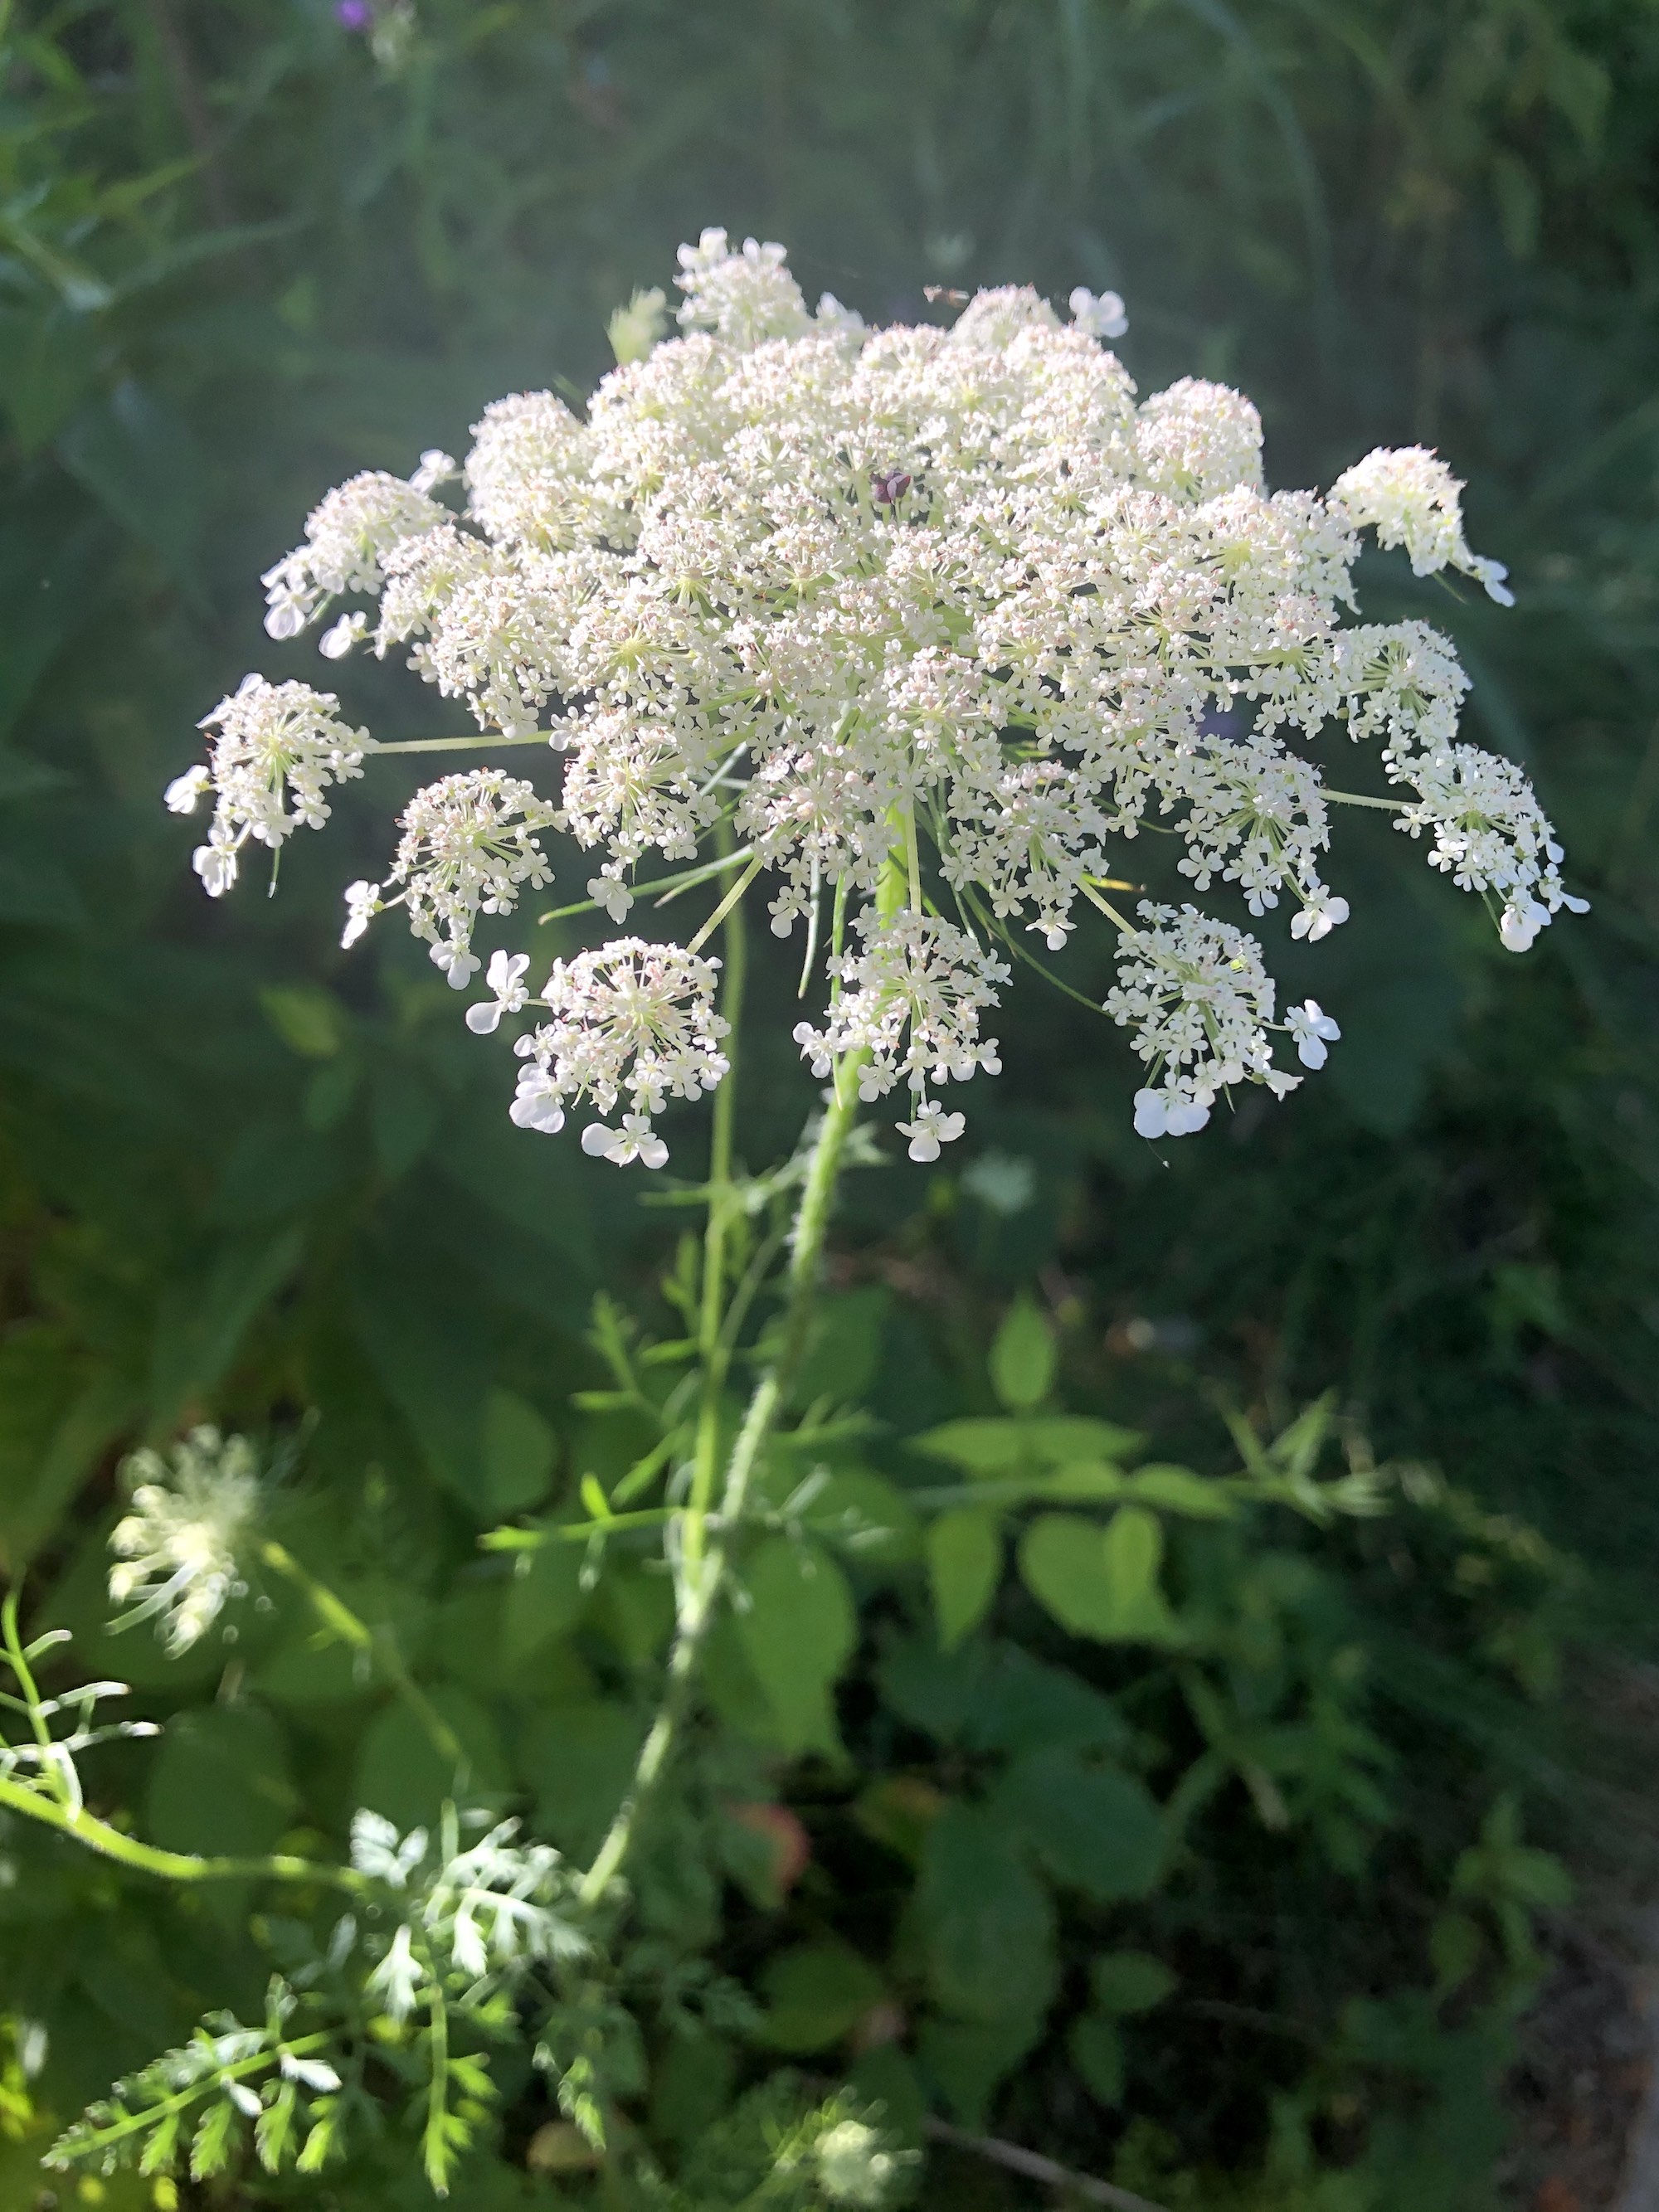 Queen Anne's Lace on bank of retaining pond on the corner of Nakoma Road and Manitou Way on July 17, 2020.